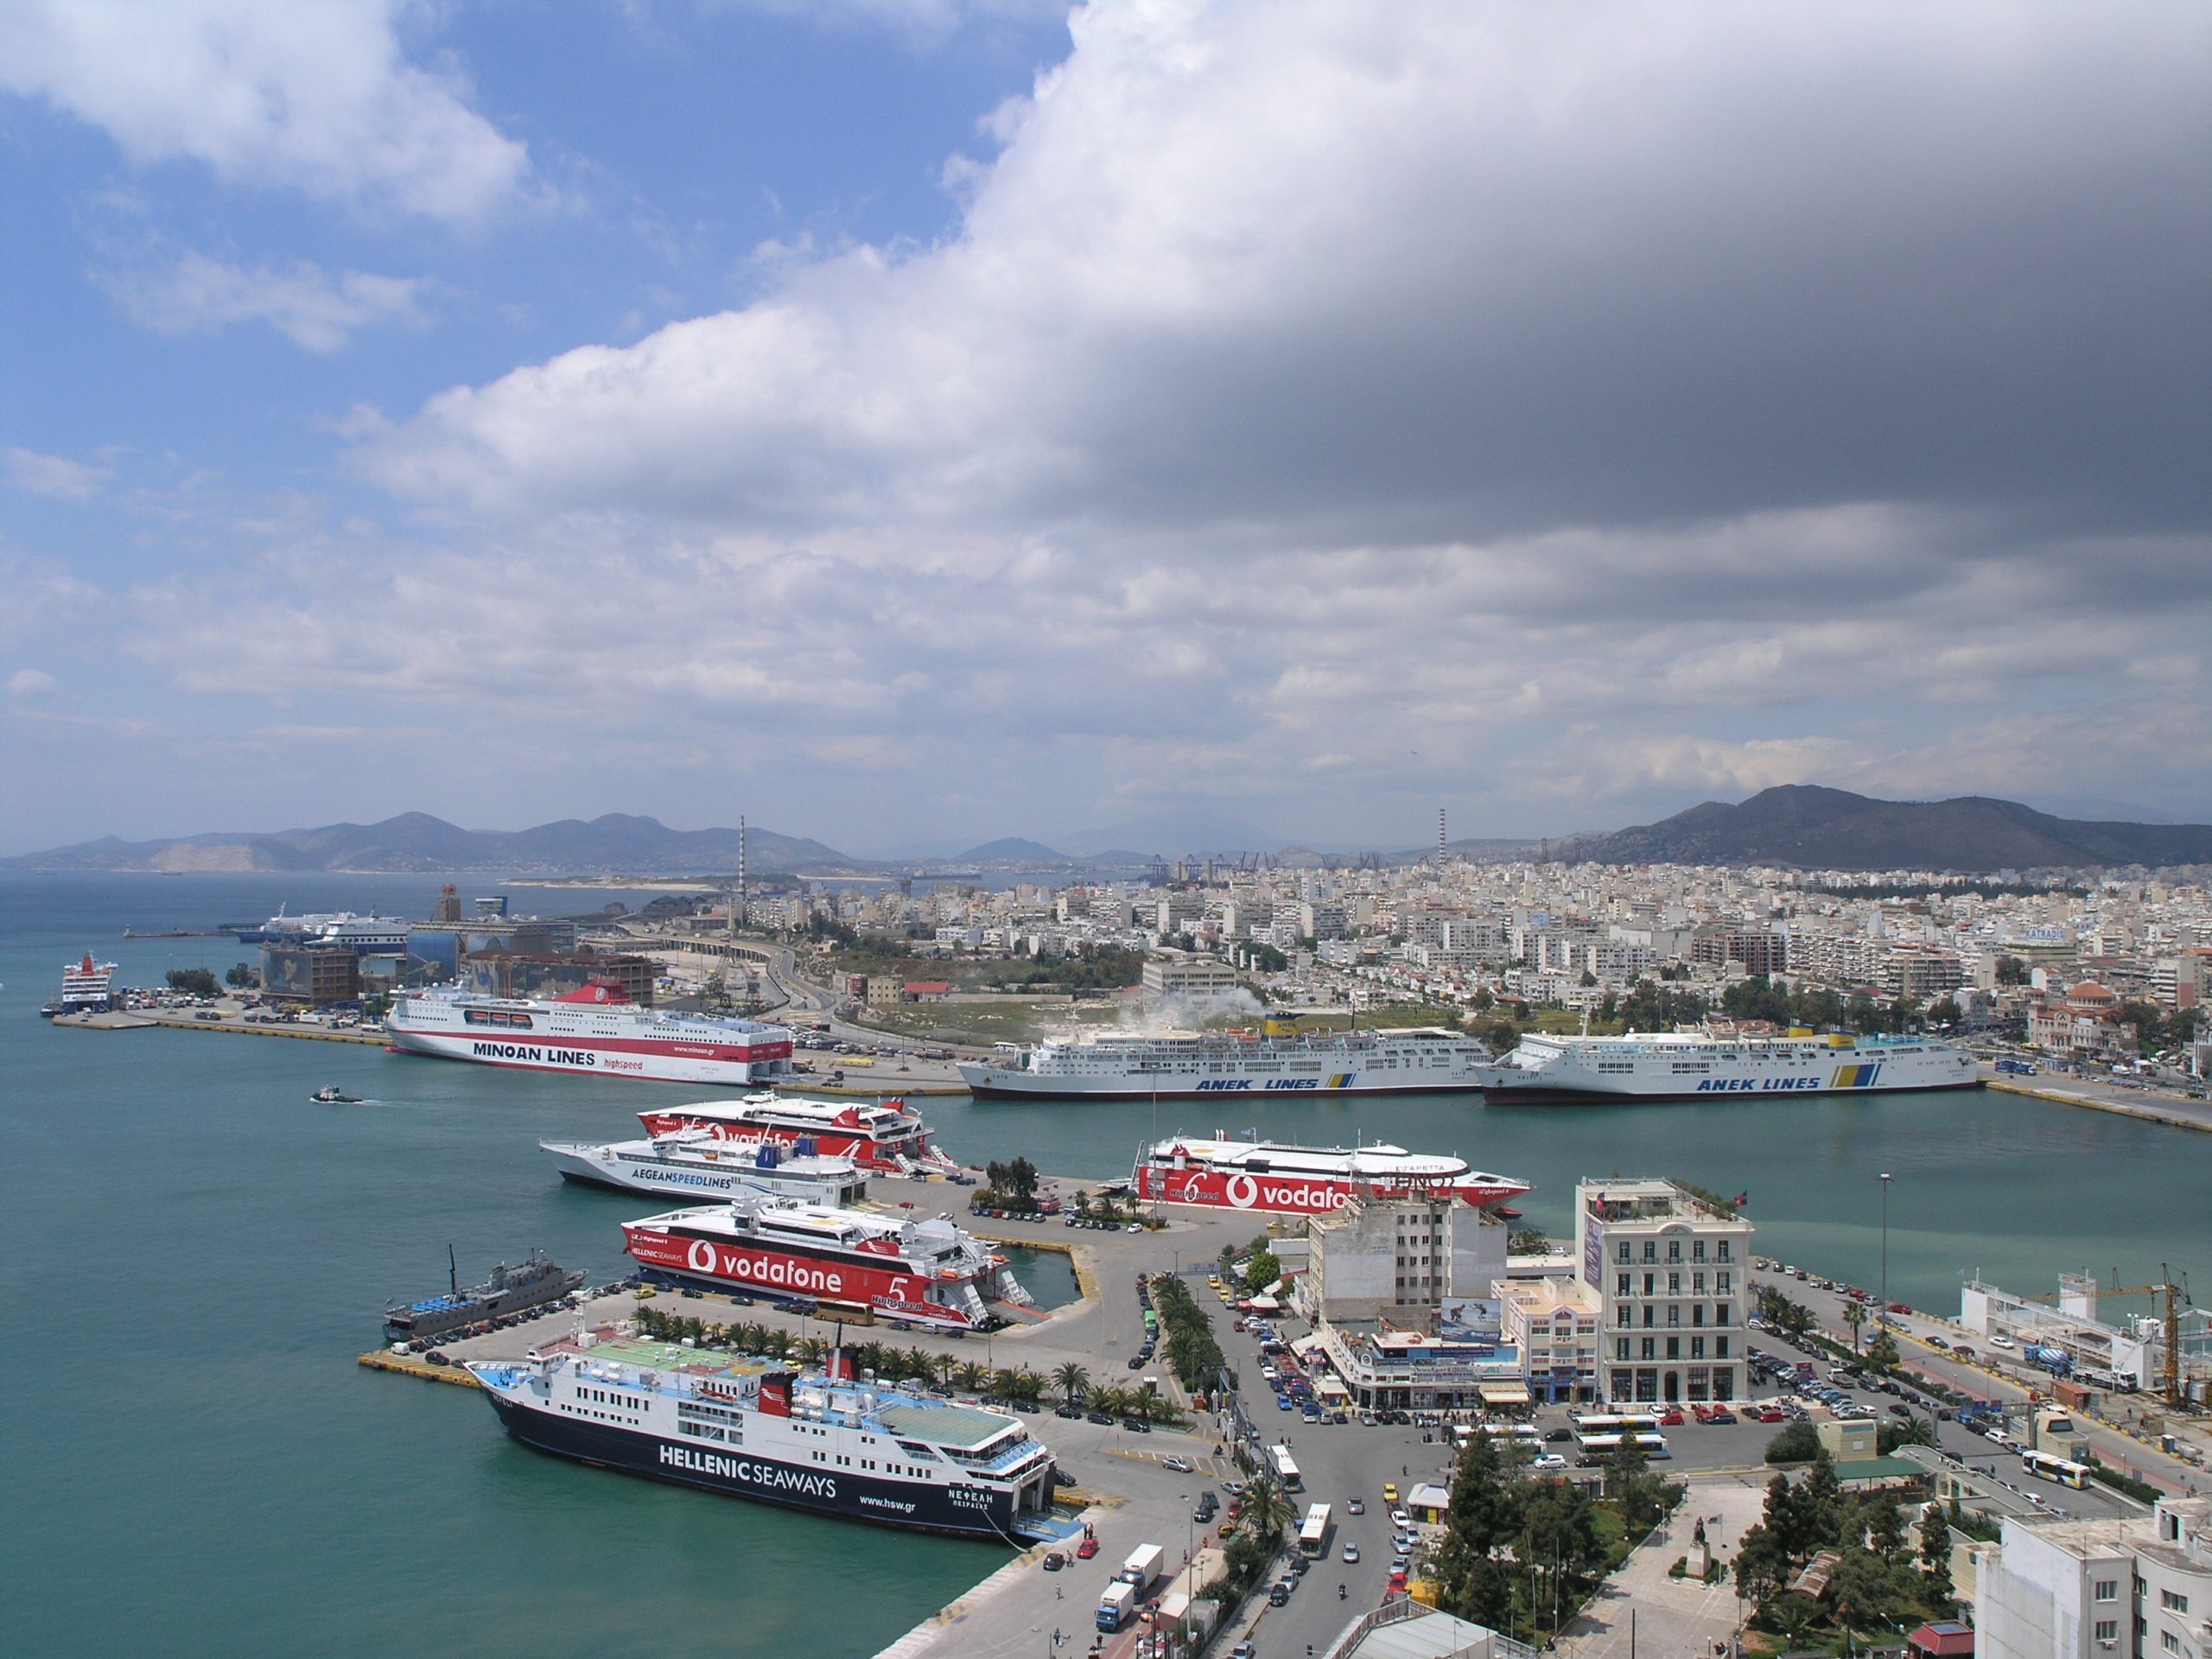 Piraeus Chamber of Commerce and Industry – Dynamic increase of new business registrations in the big port